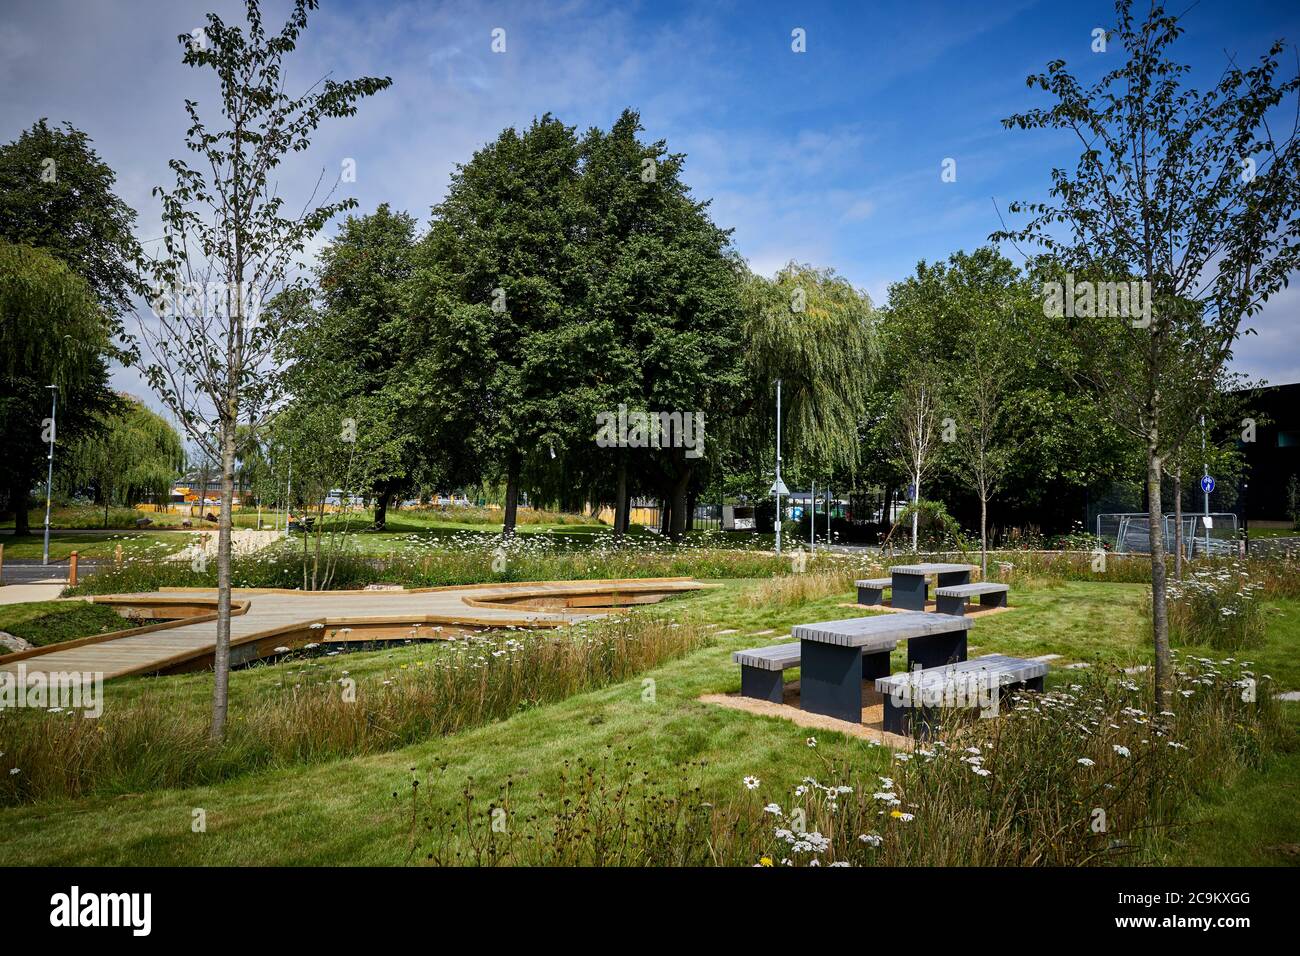 The former Shameless Estate in West Gorton has been transformed into Sponge Park  consisting of community space, walkways and playing areas. Stock Photo